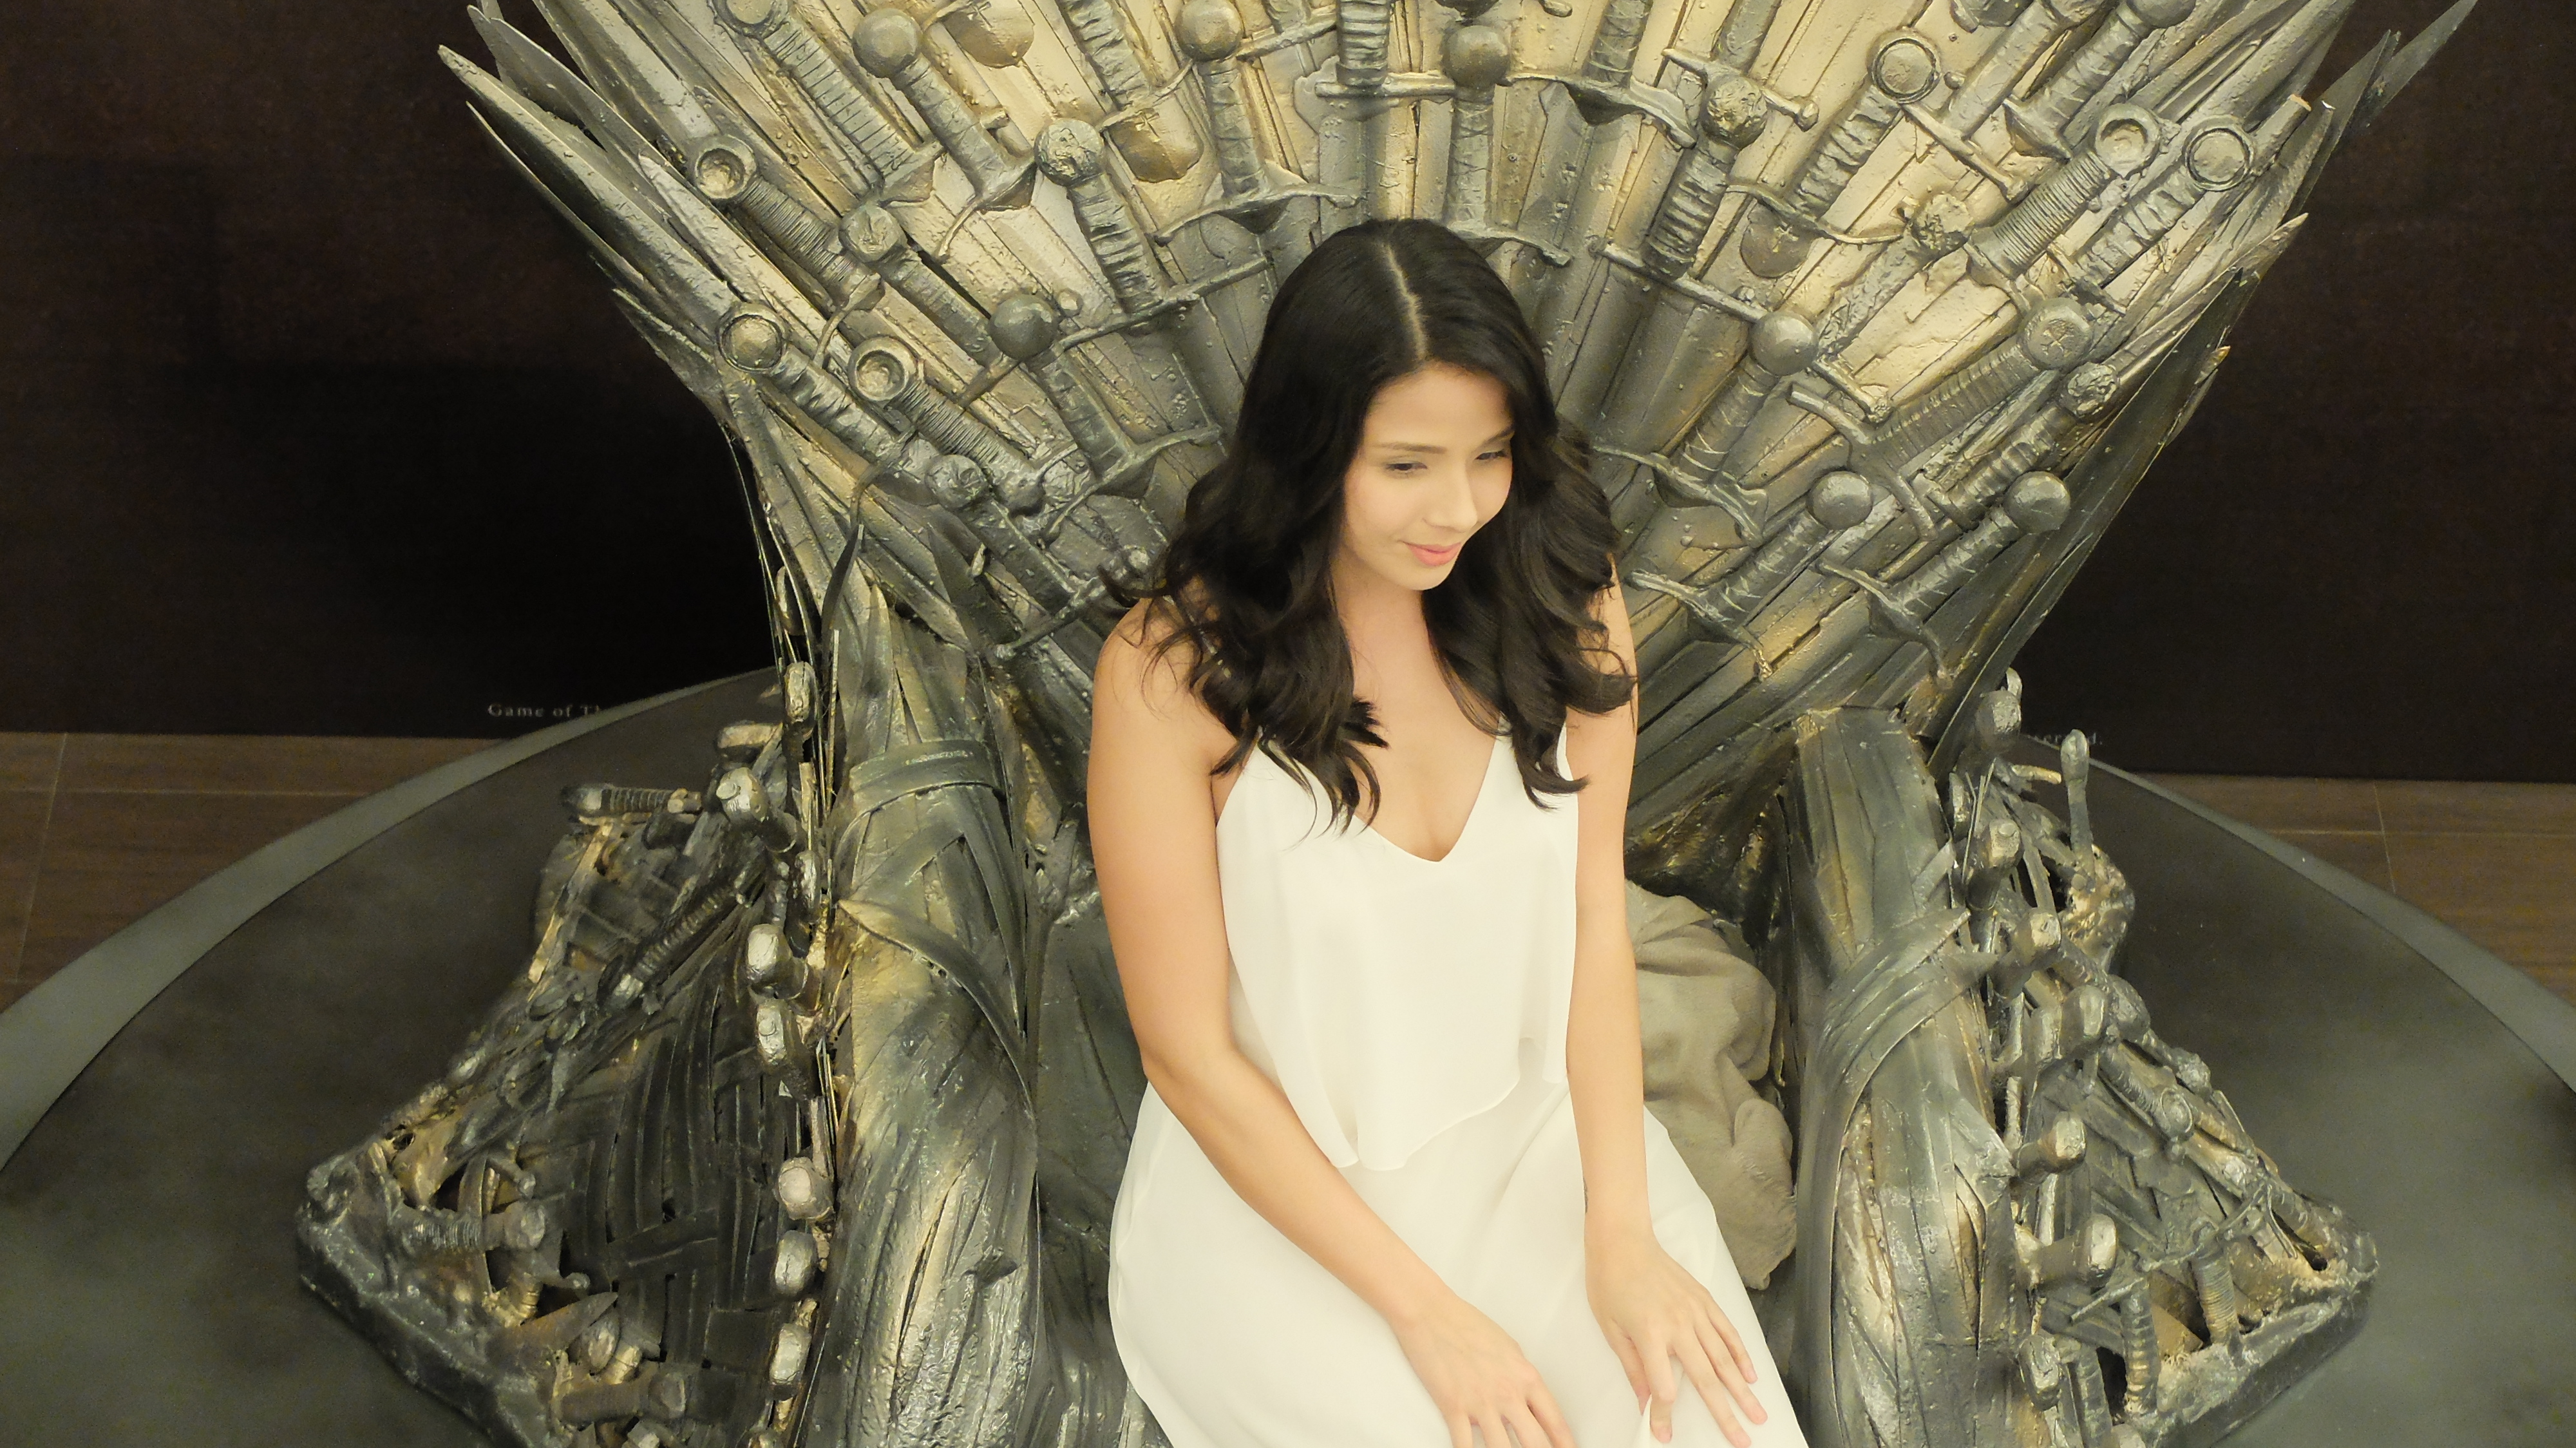 Game Of Thrones Season 5 Returns On April 13 To The Philippines On